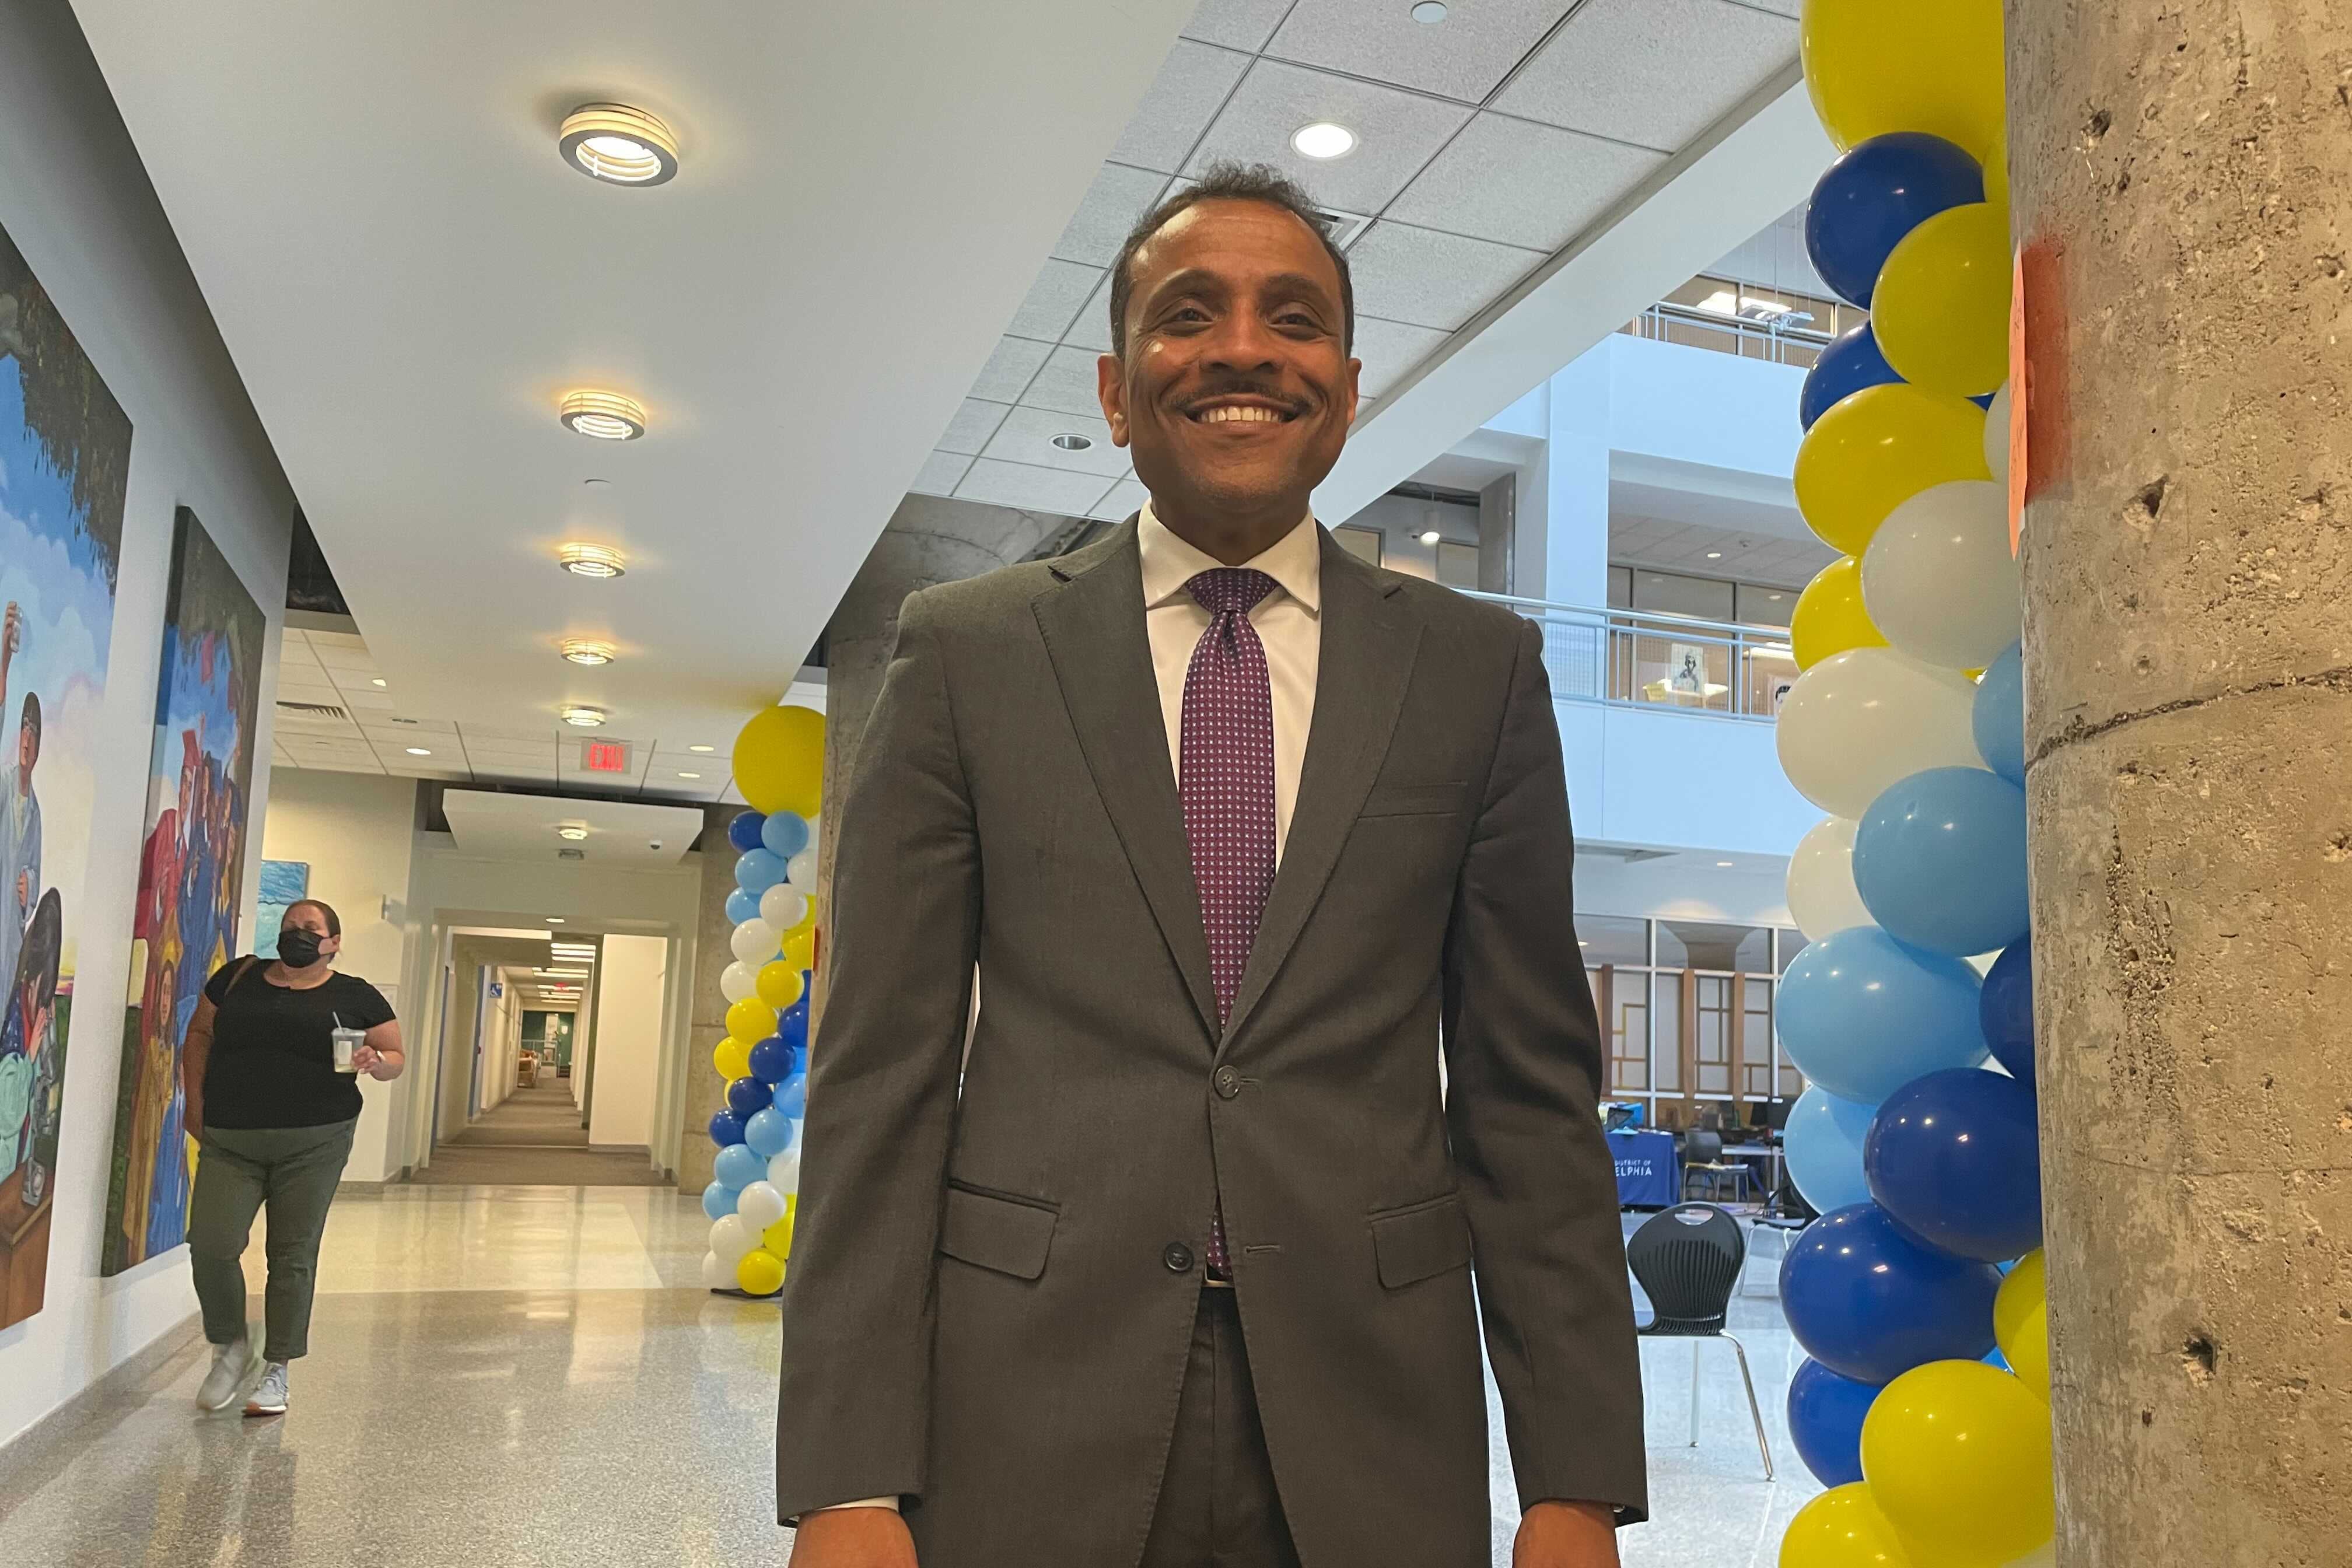 A smiling man in a gray suit stands in a hallway as a woman walks behind him. There are blue, yellow, and white balloons to his left.